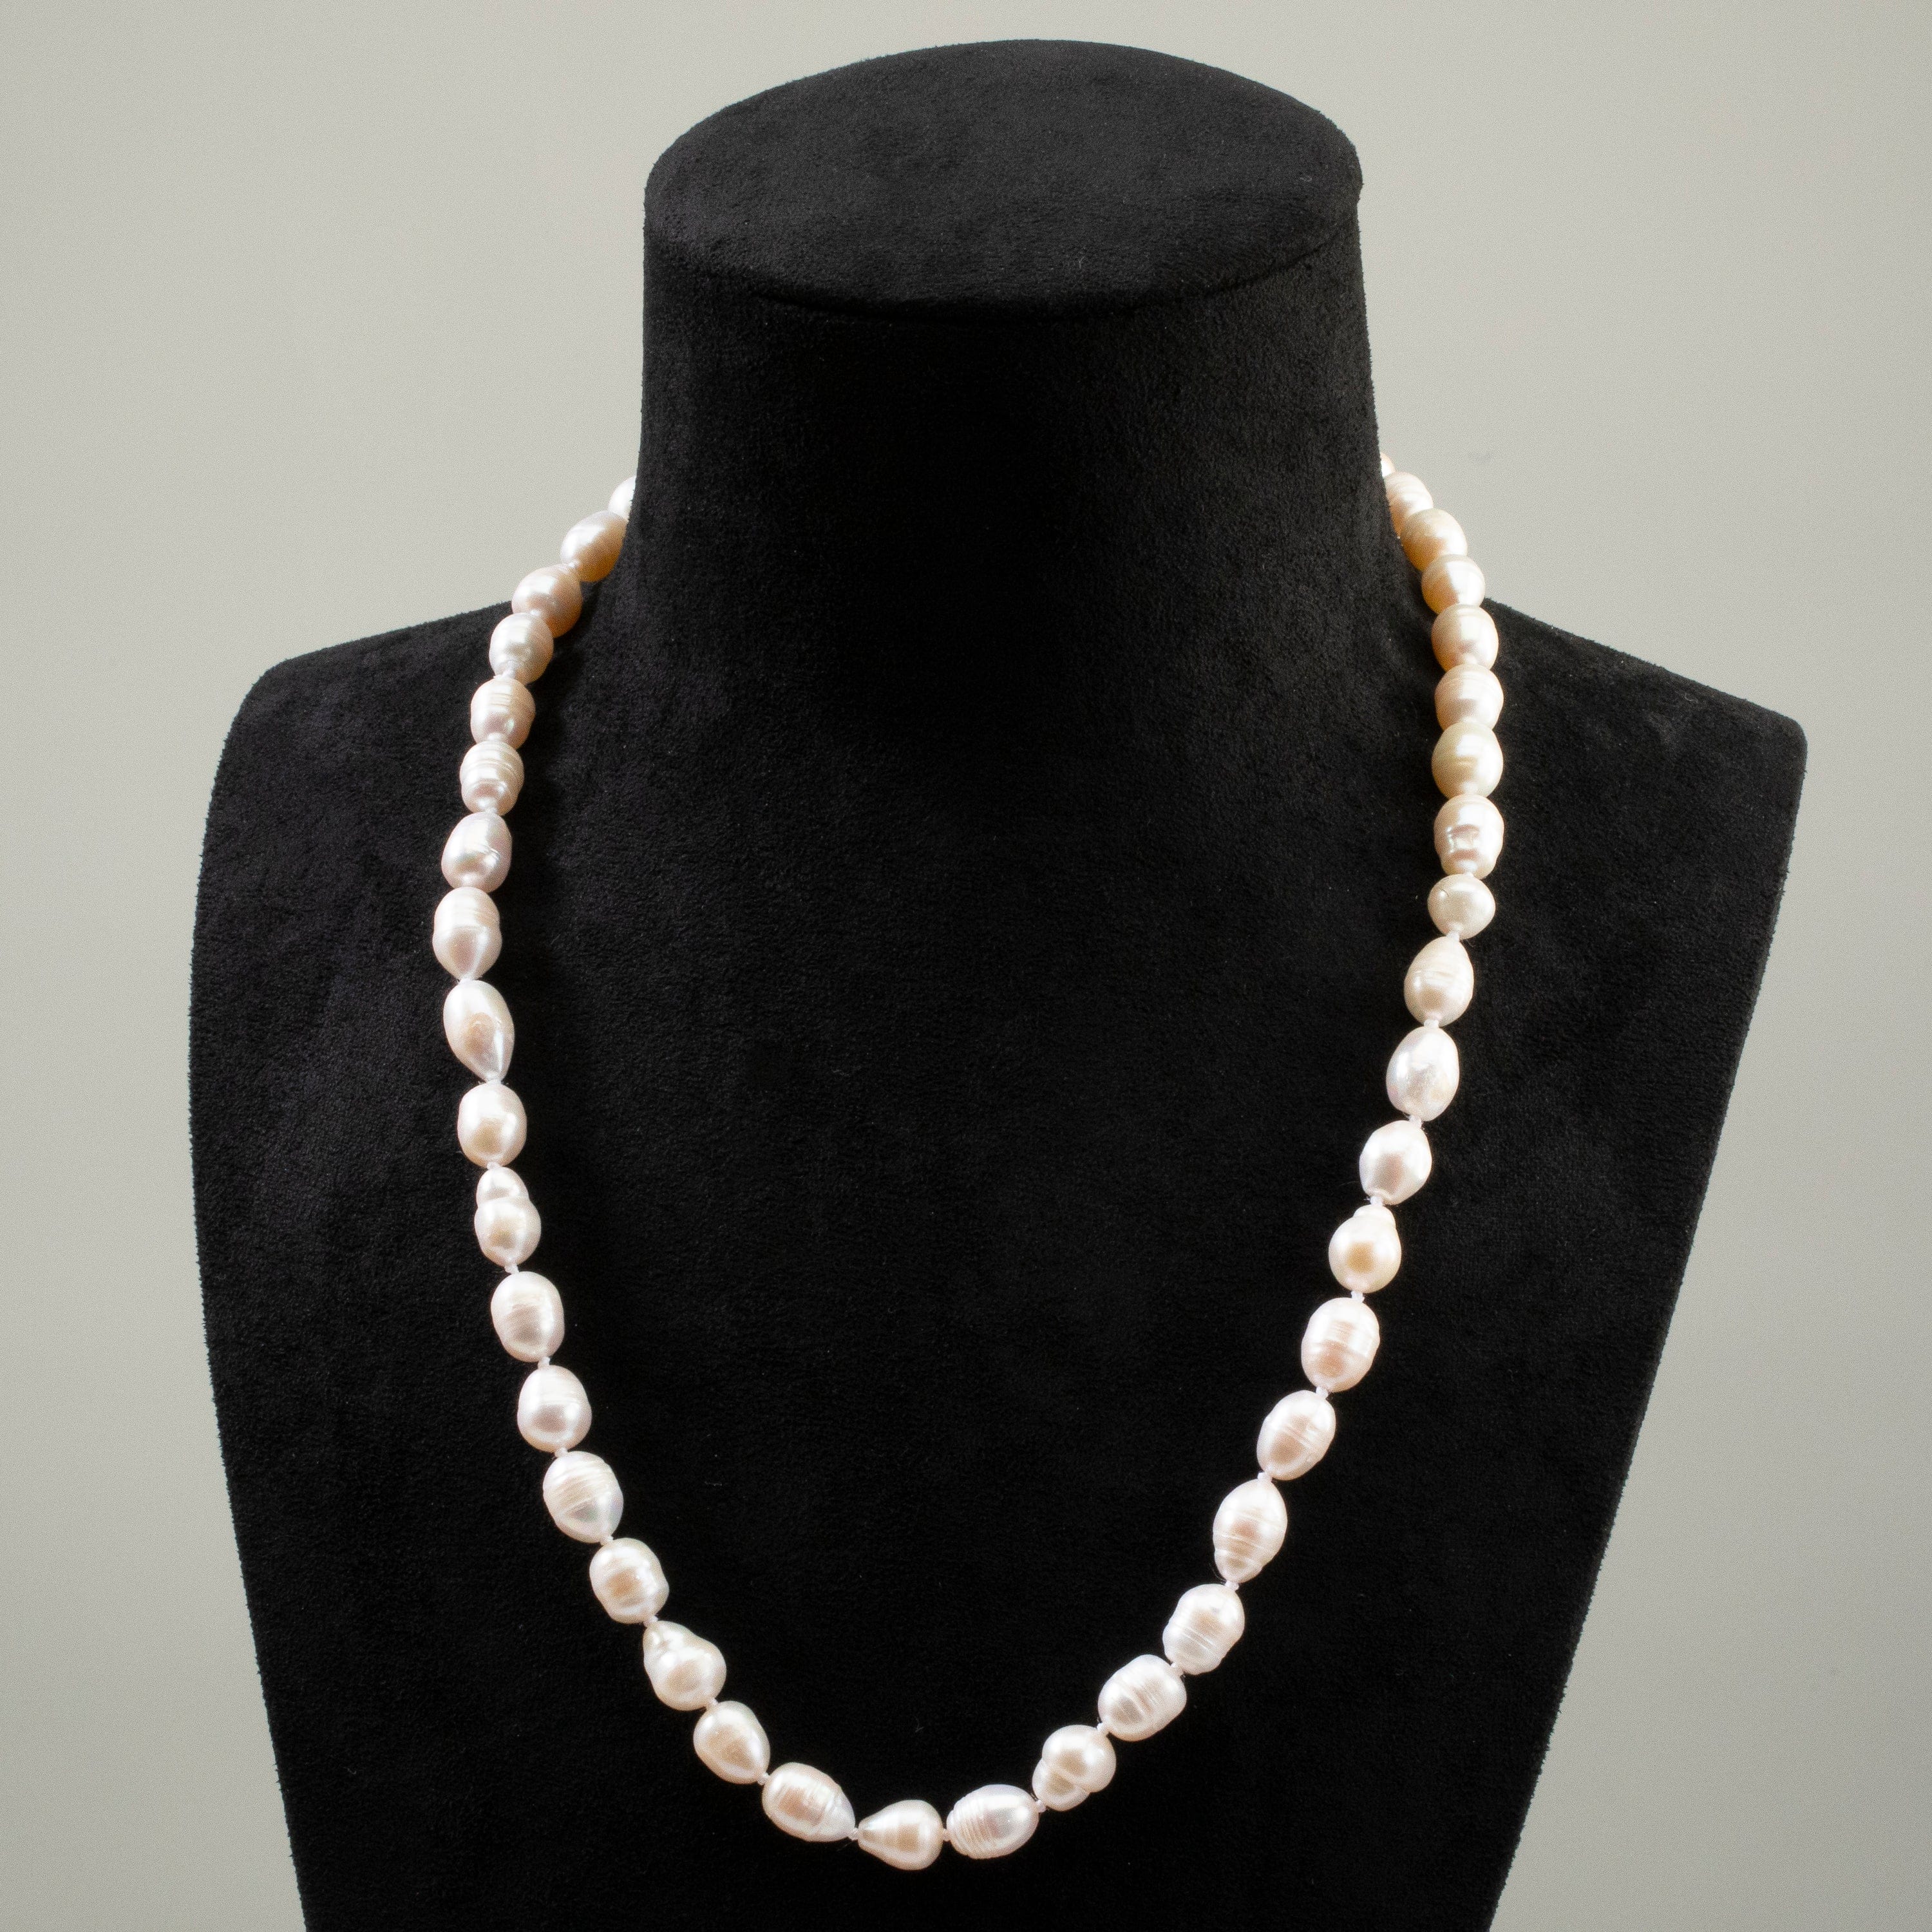 KALIFANO Jewelry 24” Freshwater Pearl Necklace TS-NGP-24